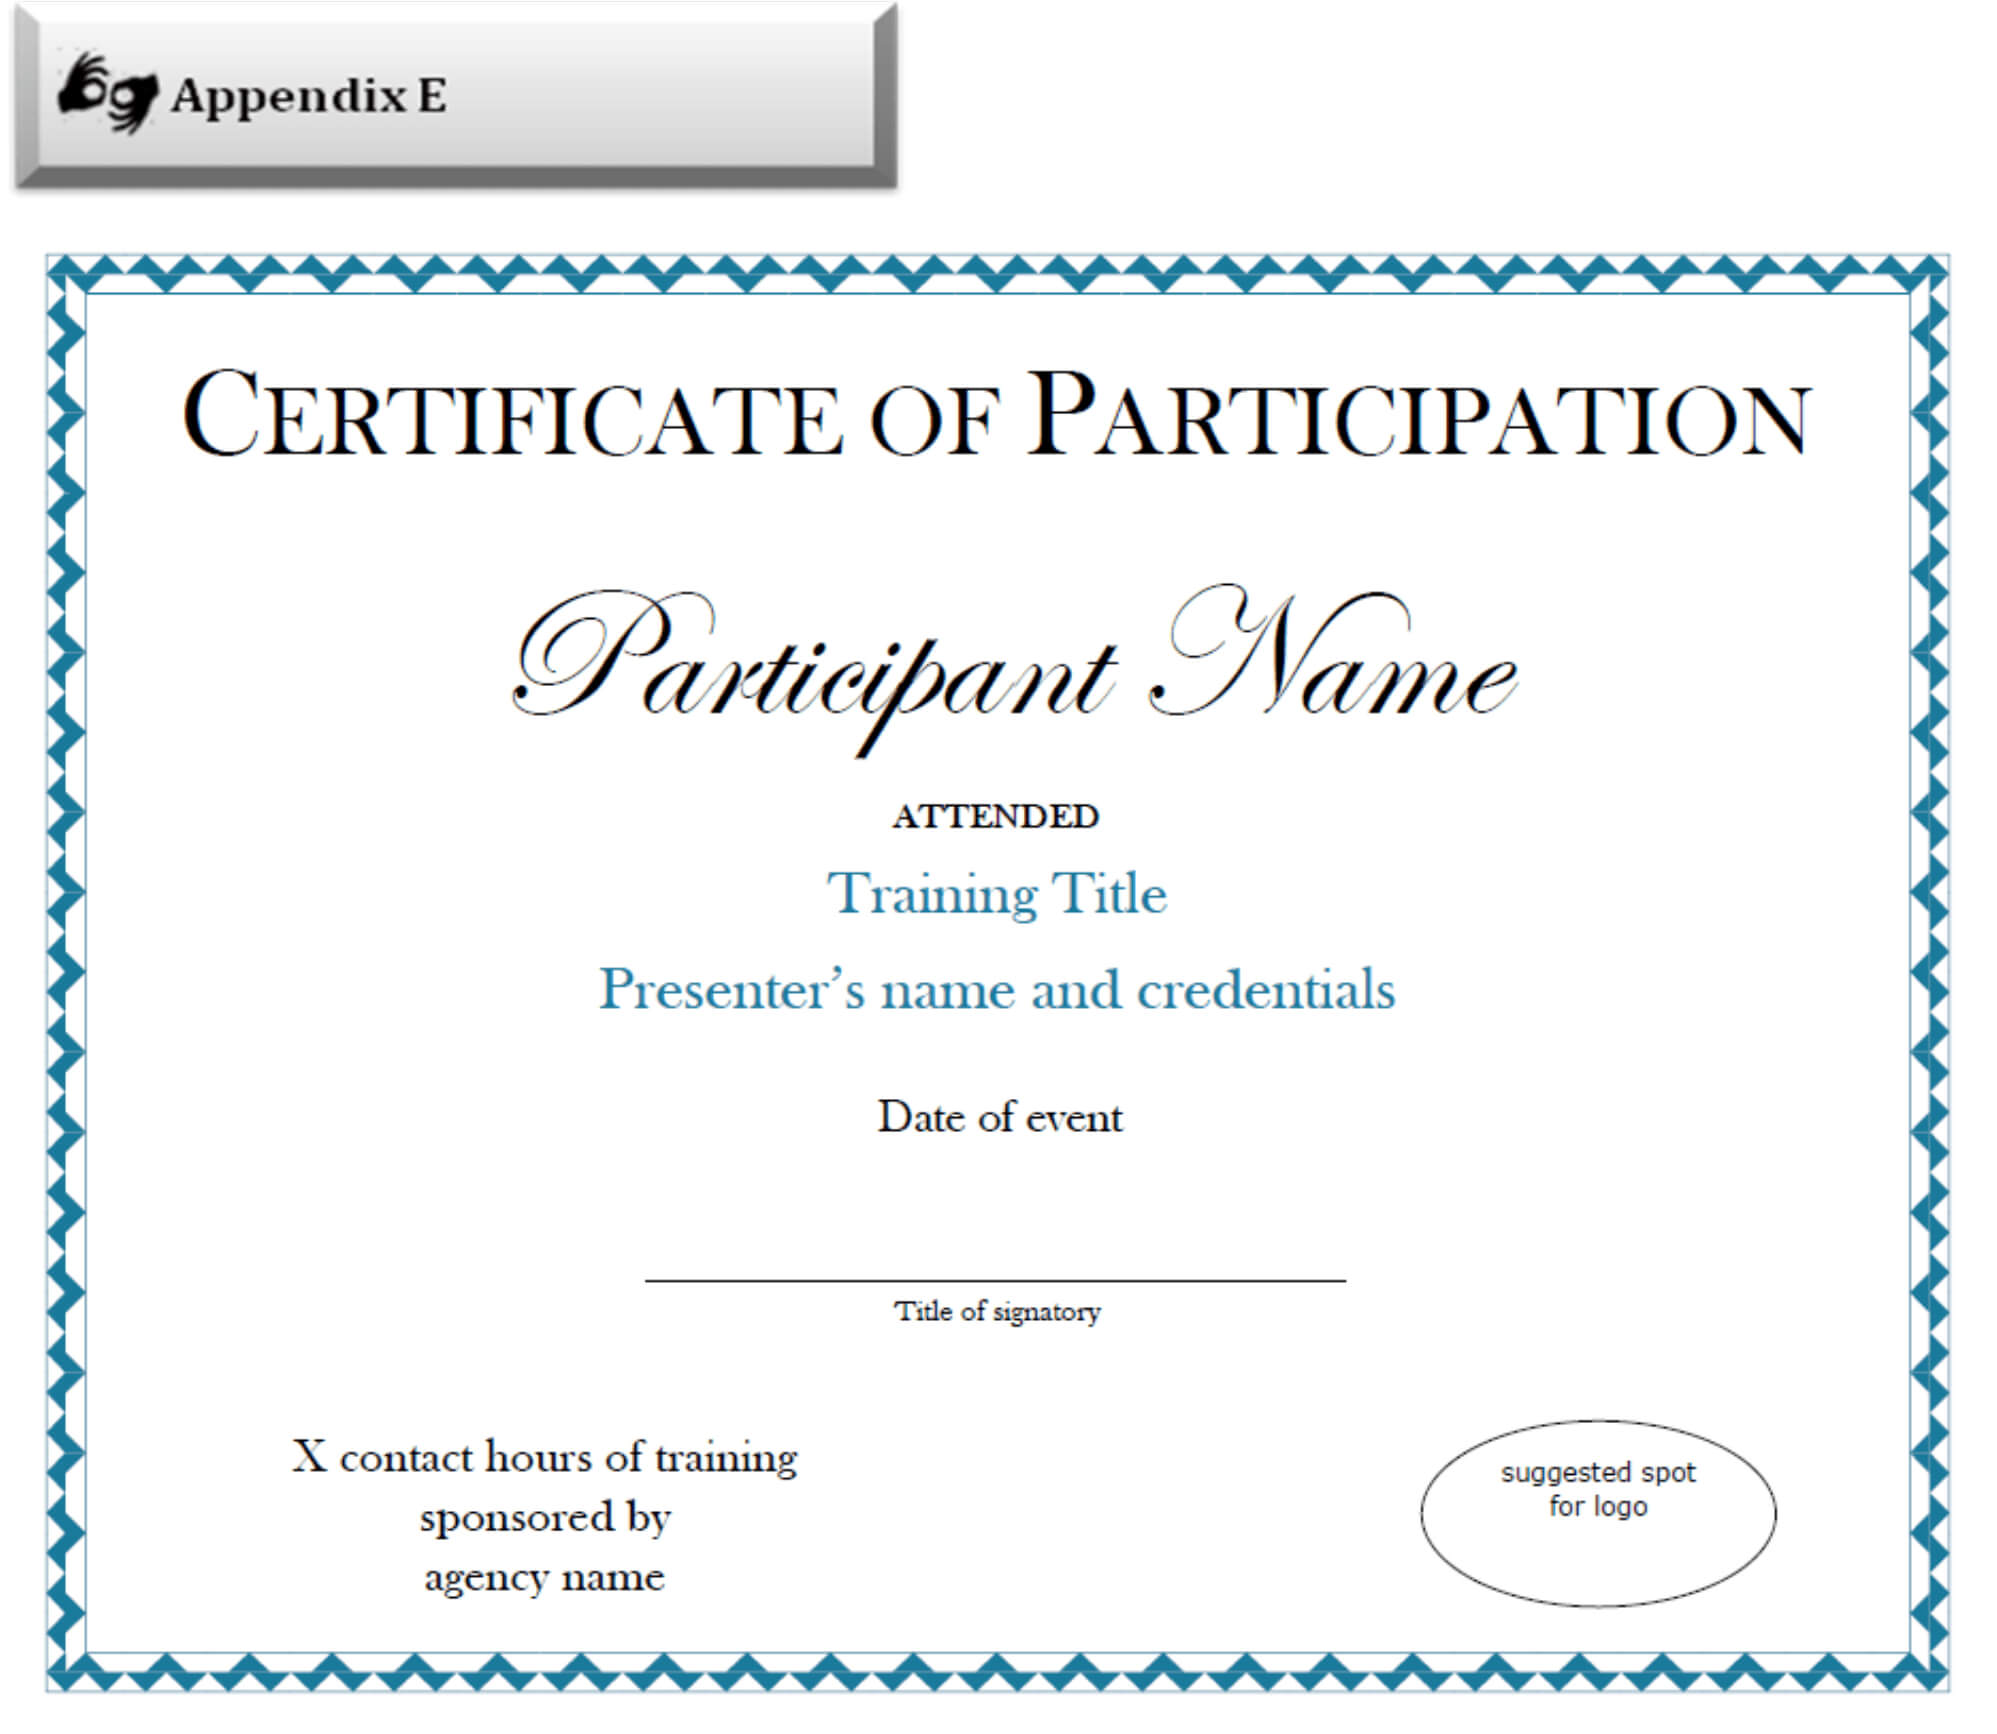 Participation Certificate Template Free Download | Sample For Participation Certificate Templates Free Download